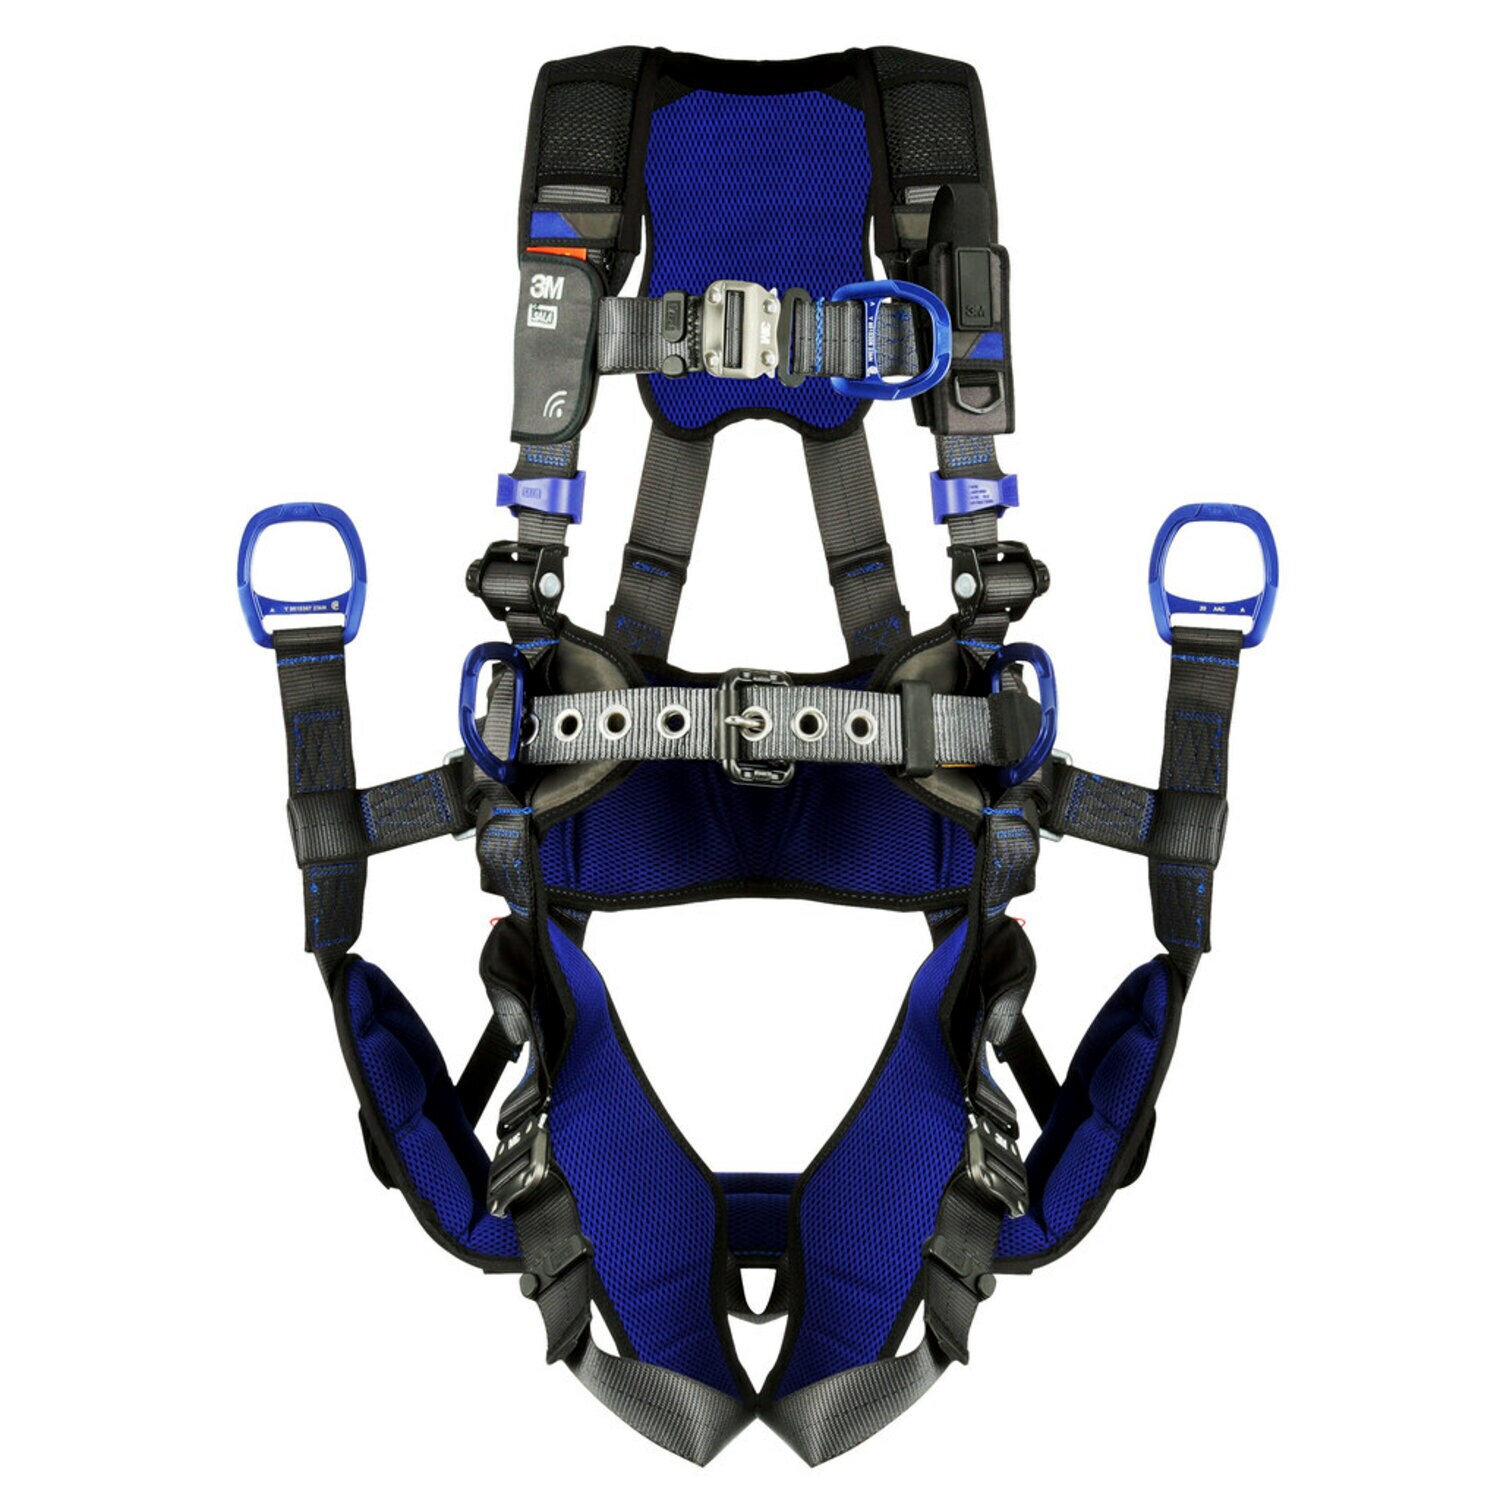 7012816241 - 3M DBI-SALA ExoFit NEX X300 Comfort Tower Climbing/Positioning/Suspension Safety Harness with Mesh Shoulders 1113194, 2X